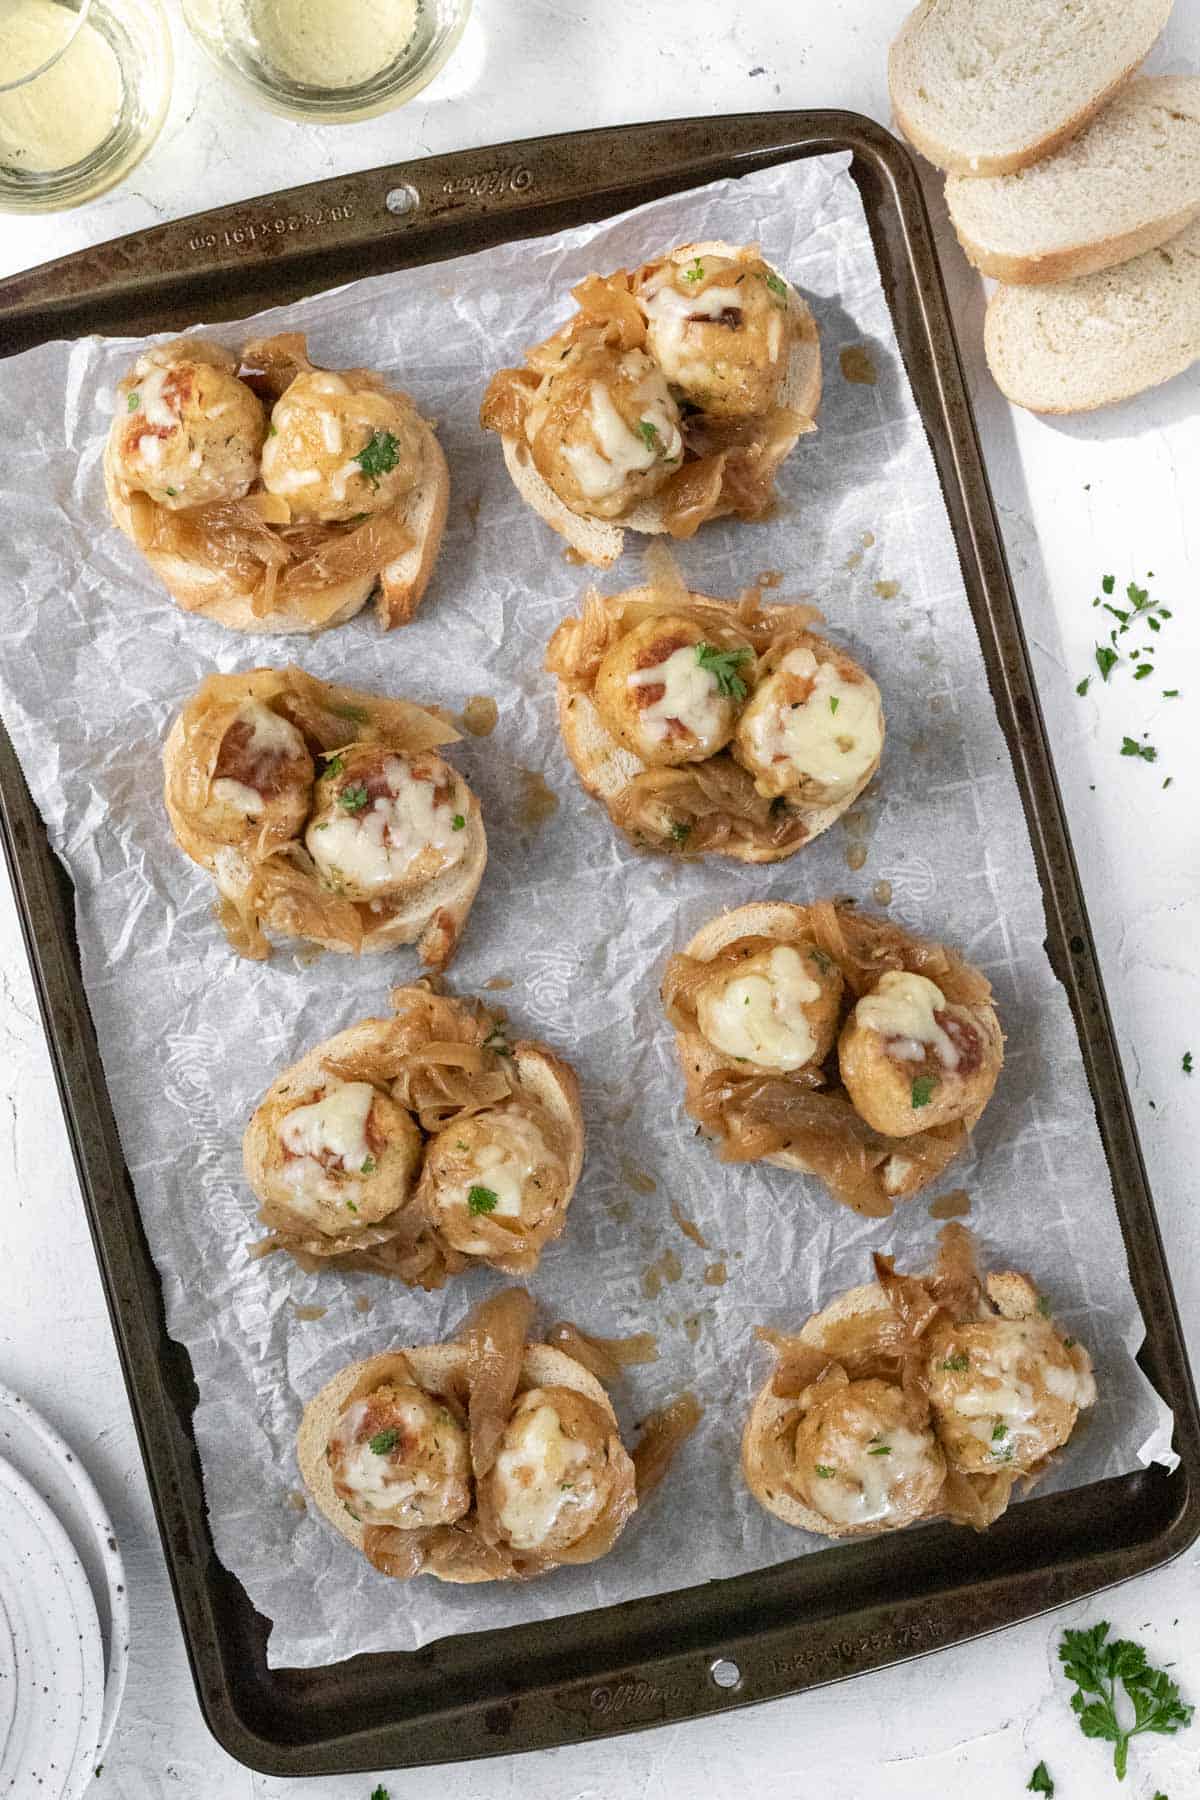 Toasted french bread topped with chicken meatballs, caramelized onions, and melted cheese lined up on a sheet pan..